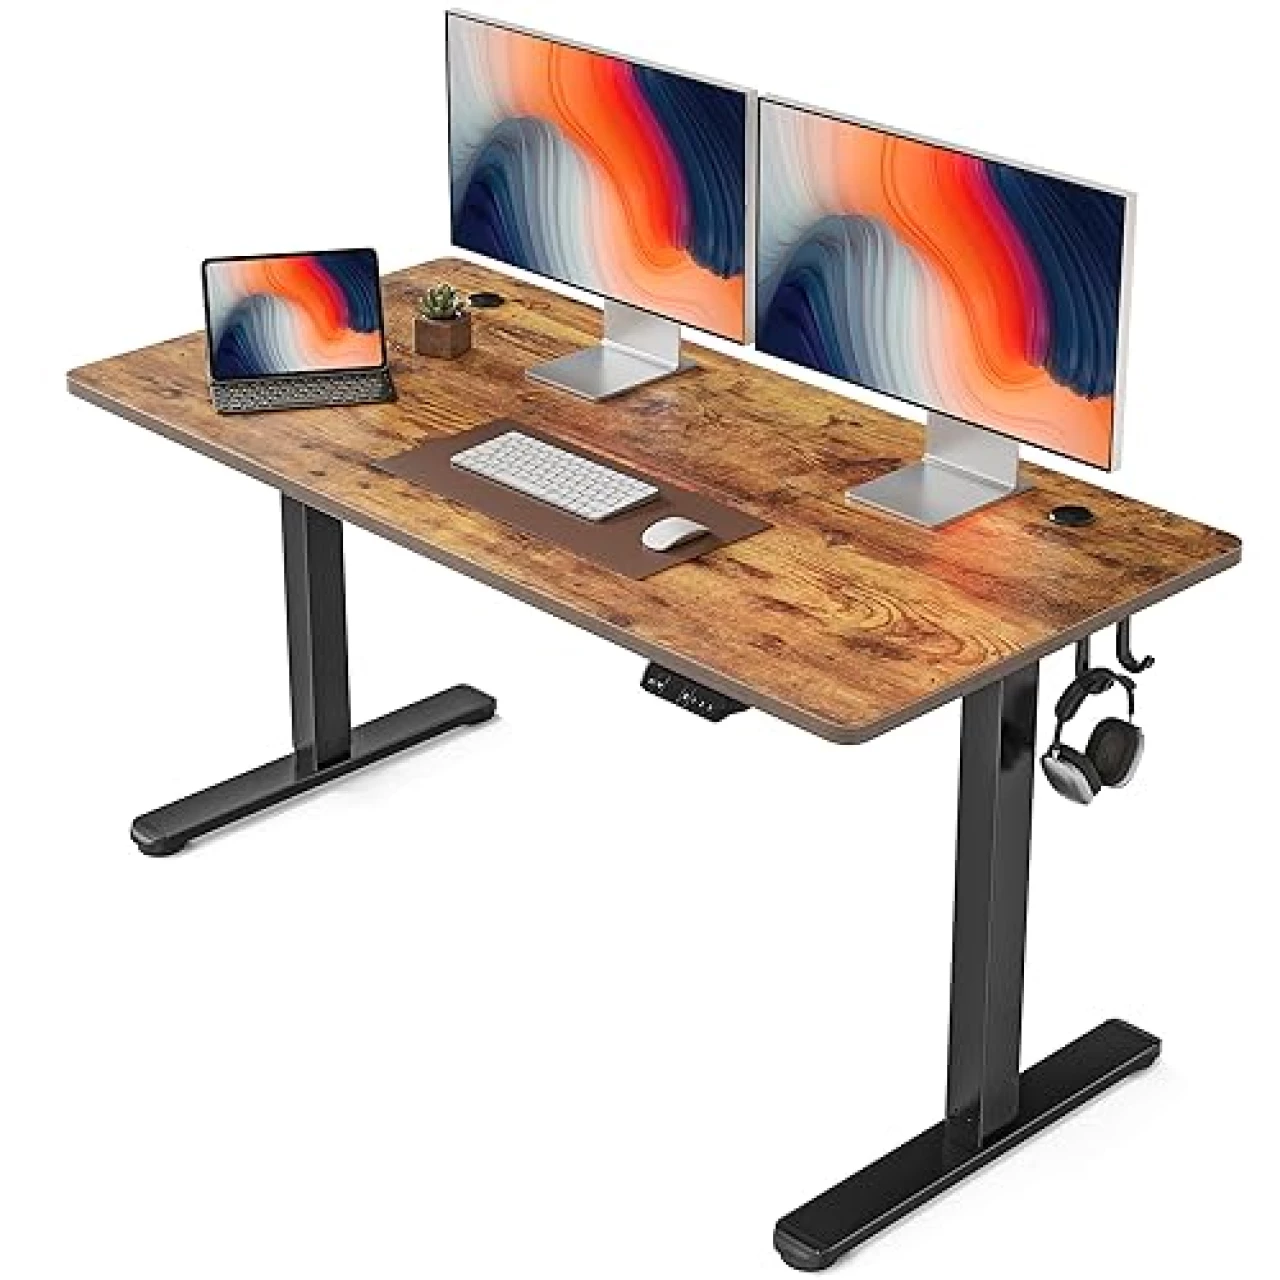 FEZIBO Height Adjustable Electric Standing Desk, 55 x 24 Inches Stand up Table, Sit Stand Home Office Desk with Splice Board